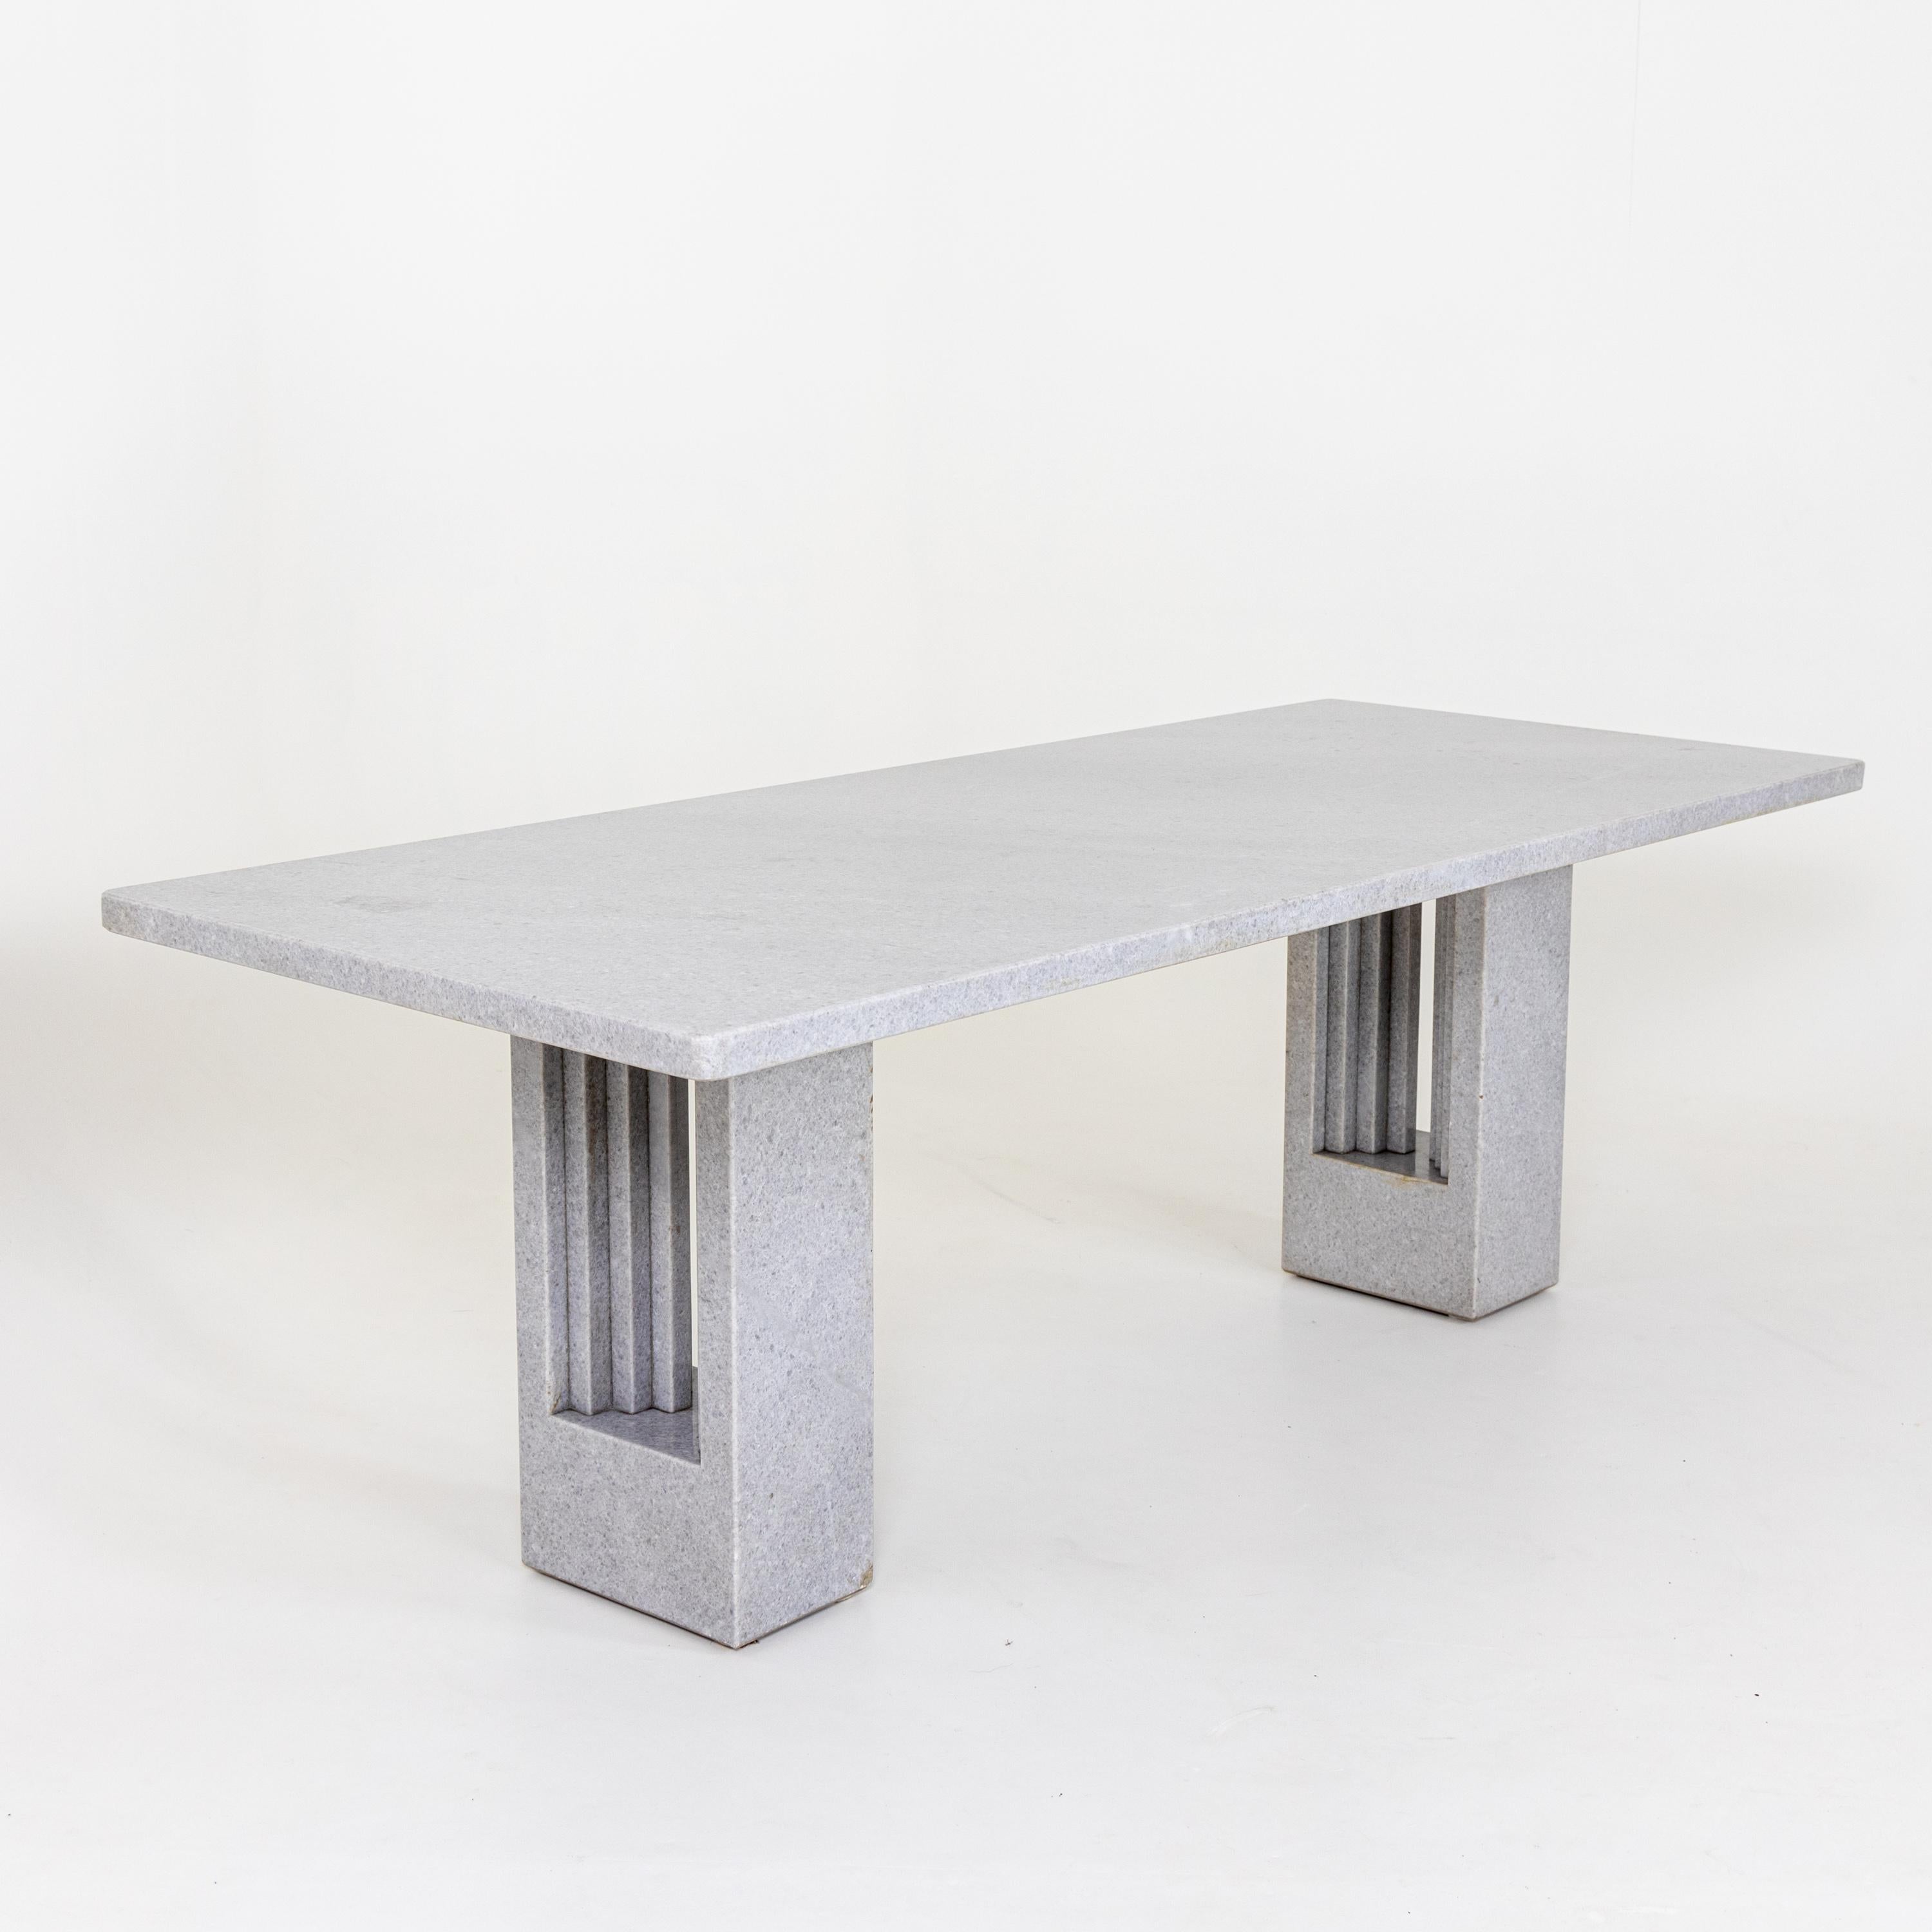 Large white marble dining table designed by Carlo Scarpa and Marcel Breuer for Gavina.